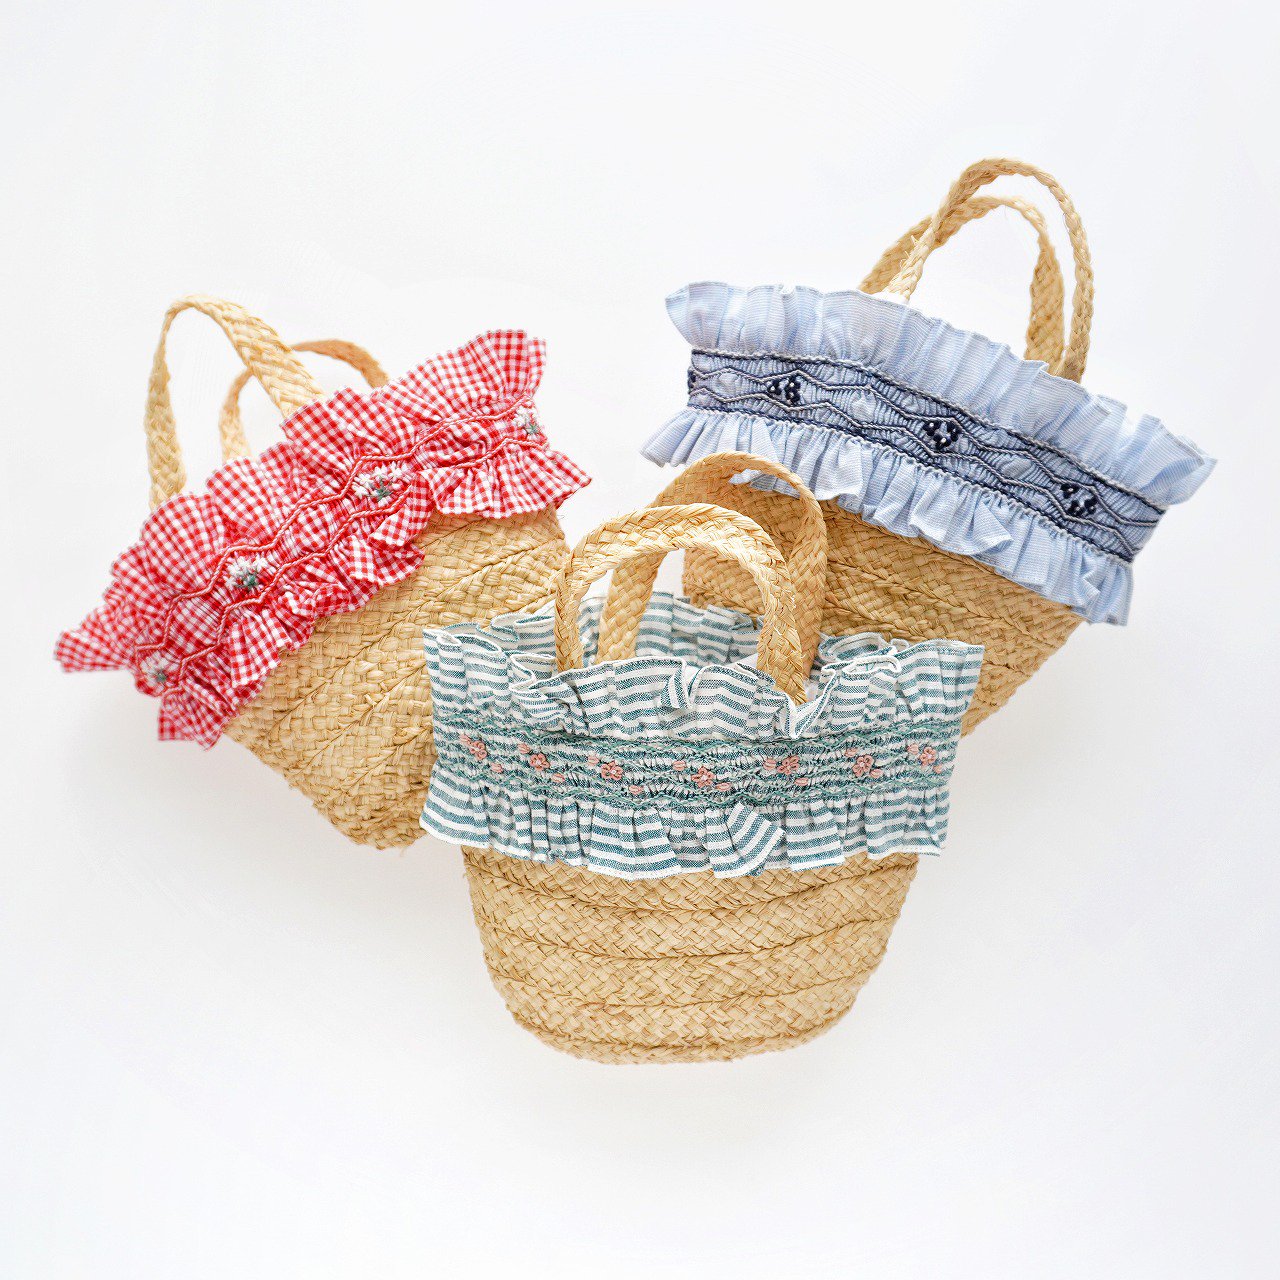 <img class='new_mark_img1' src='https://img.shop-pro.jp/img/new/icons1.gif' style='border:none;display:inline;margin:0px;padding:0px;width:auto;' />Kidiwi - Penelope straw bag (3 colors)